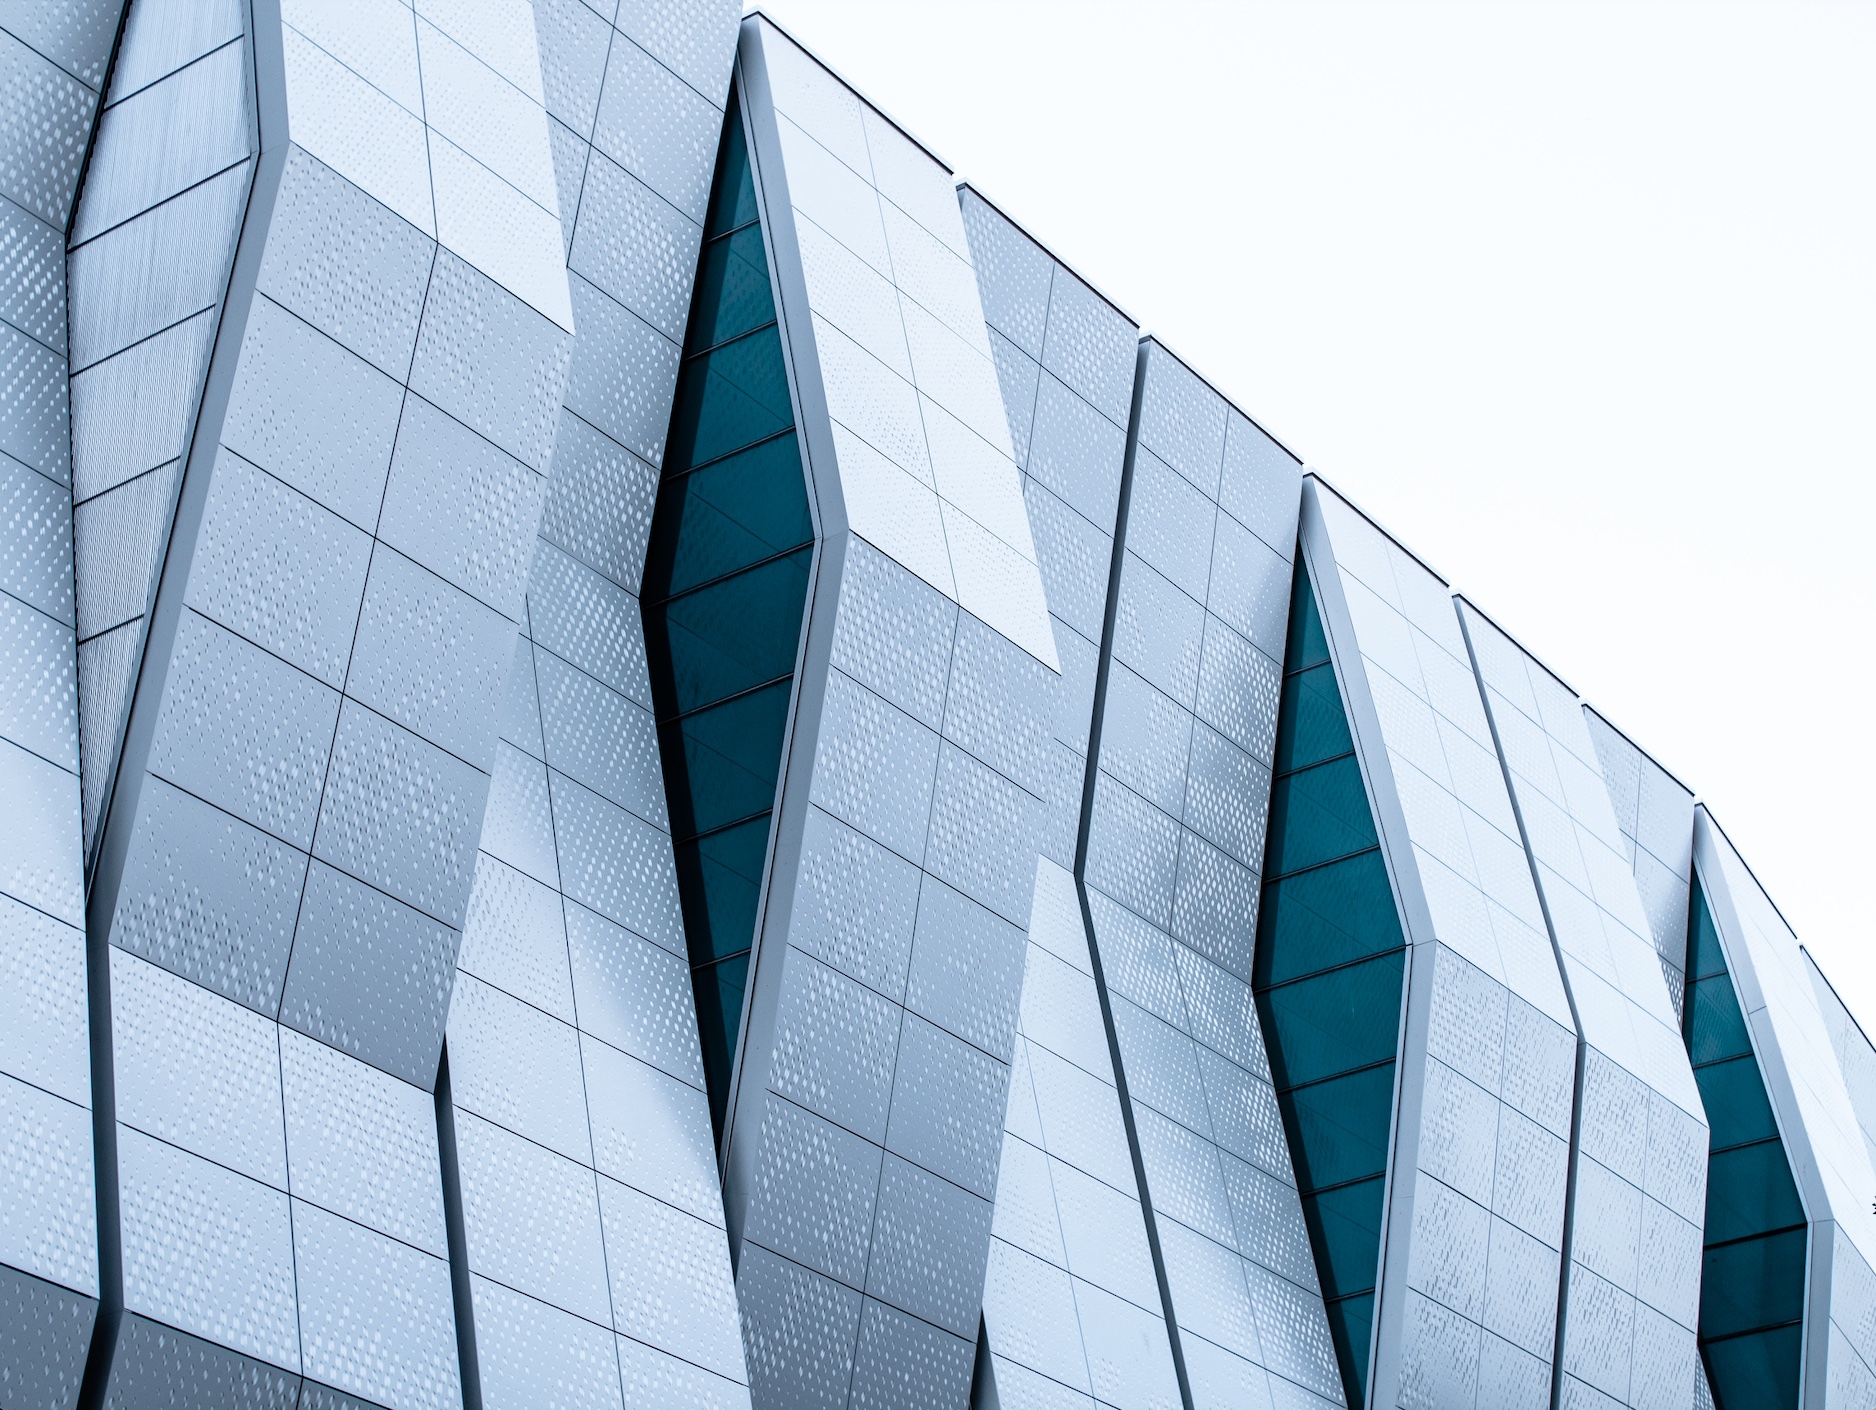 Teal windows and silver paneling on the exterior of the Golden1 Center arena; image by Meritt Thomas, via Unsplash.com.